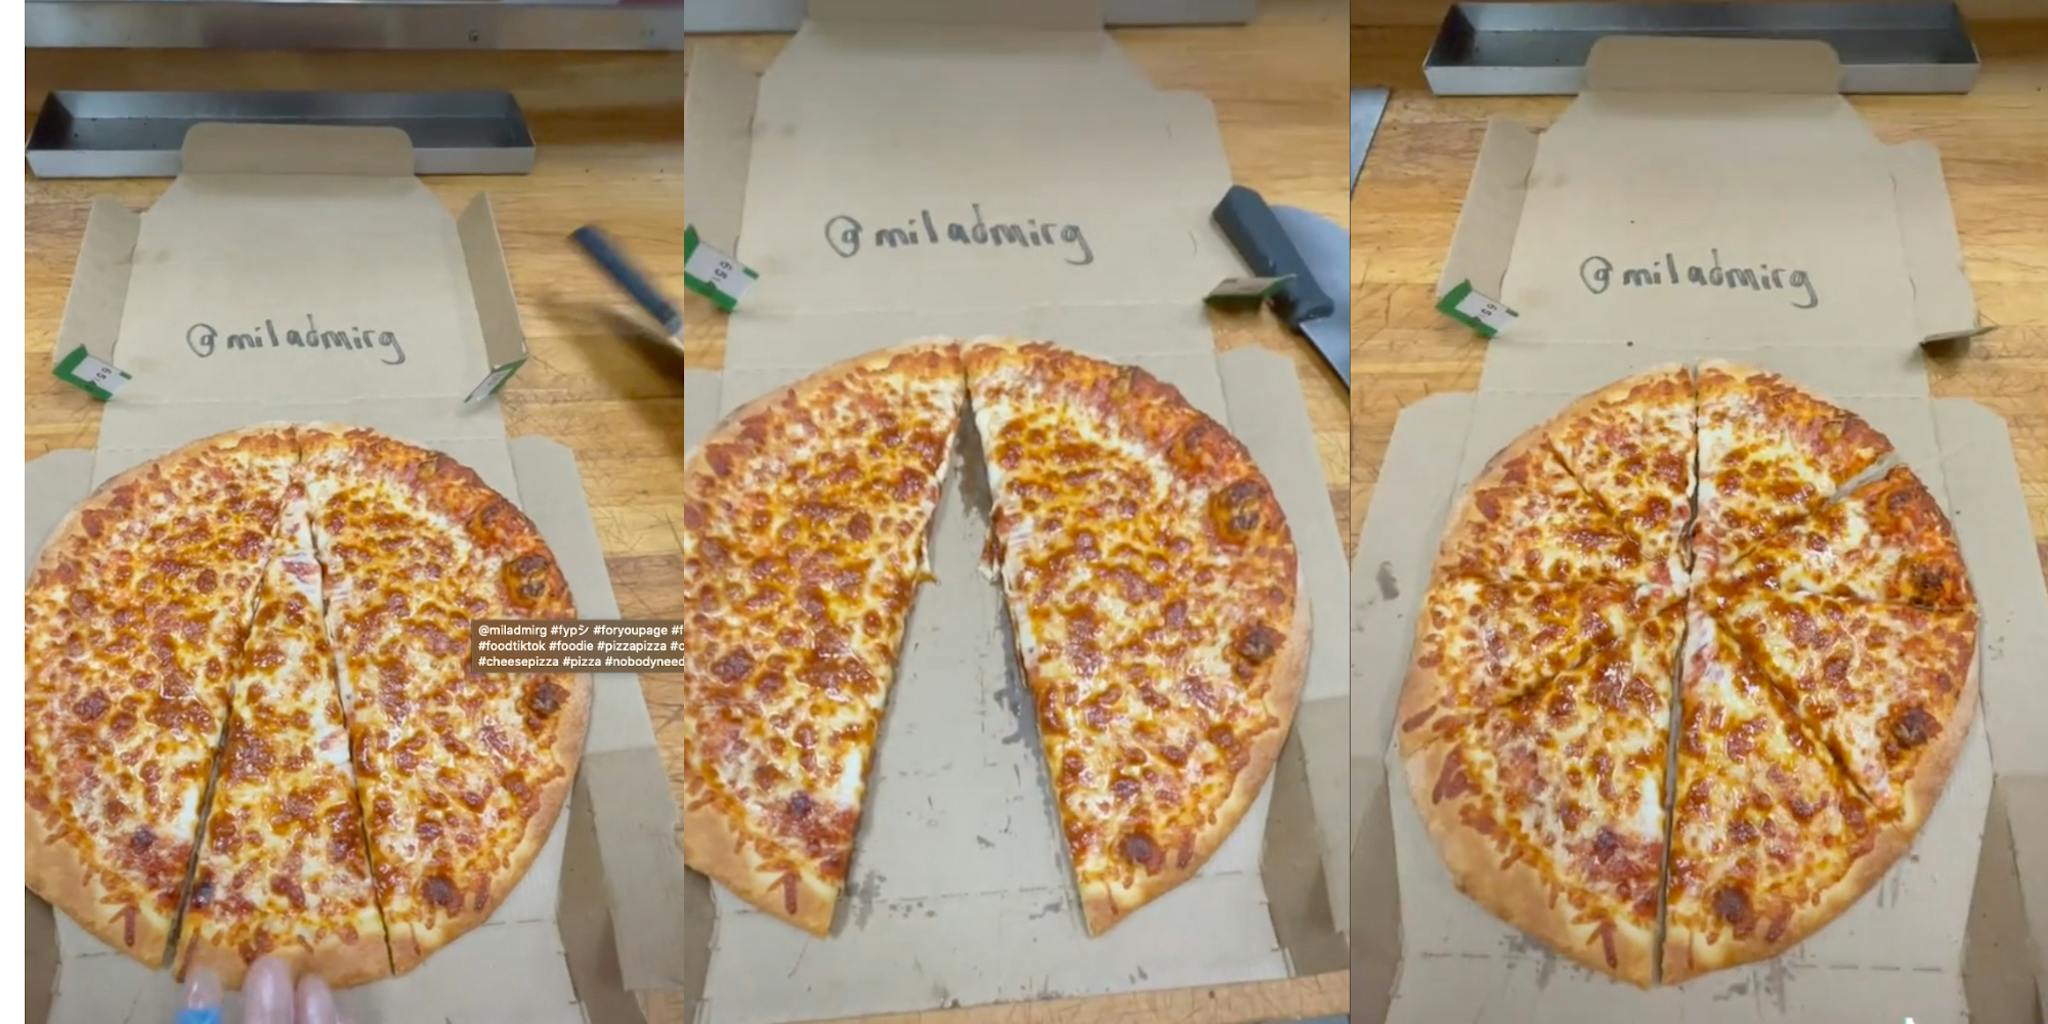 Tiktoker Goes Viral For Revealing Hack To Get Free Pizza Slices